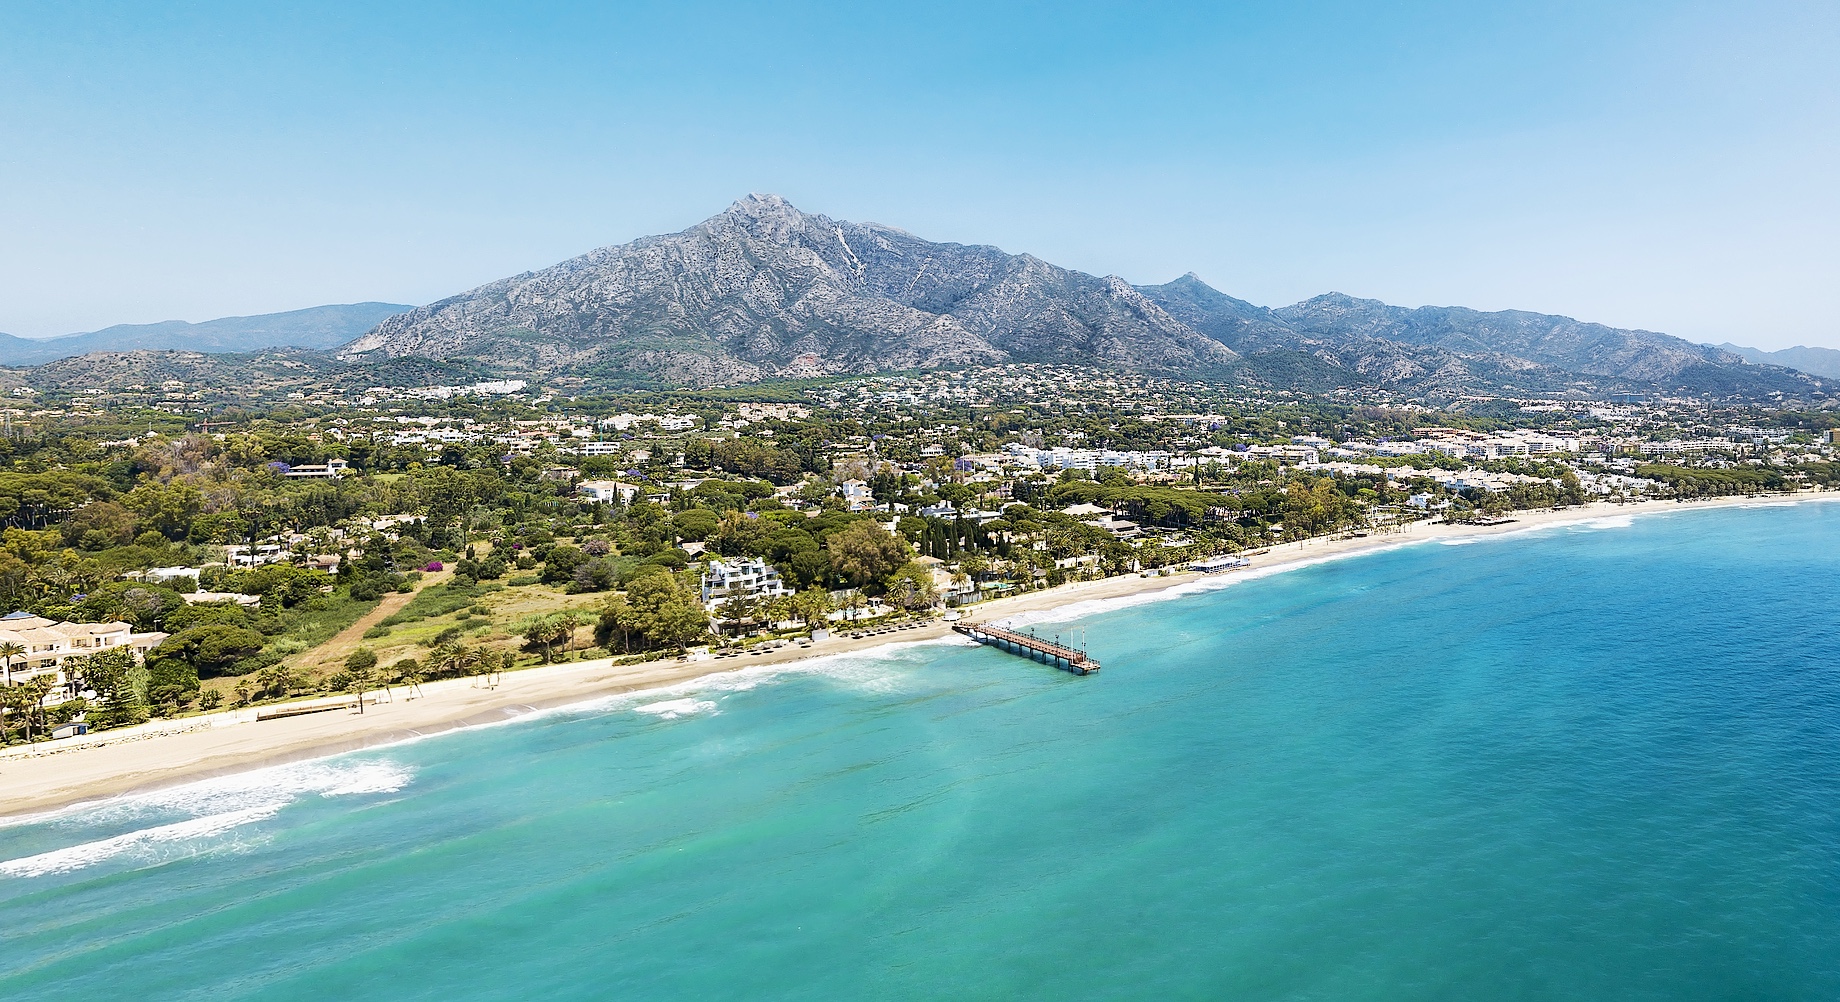 Unique aerial view of luxury and exclusive area in Marbella, golden mile beach, view of Puente Romano Bridge and in background famous La Concha mountain. Emerald water colour